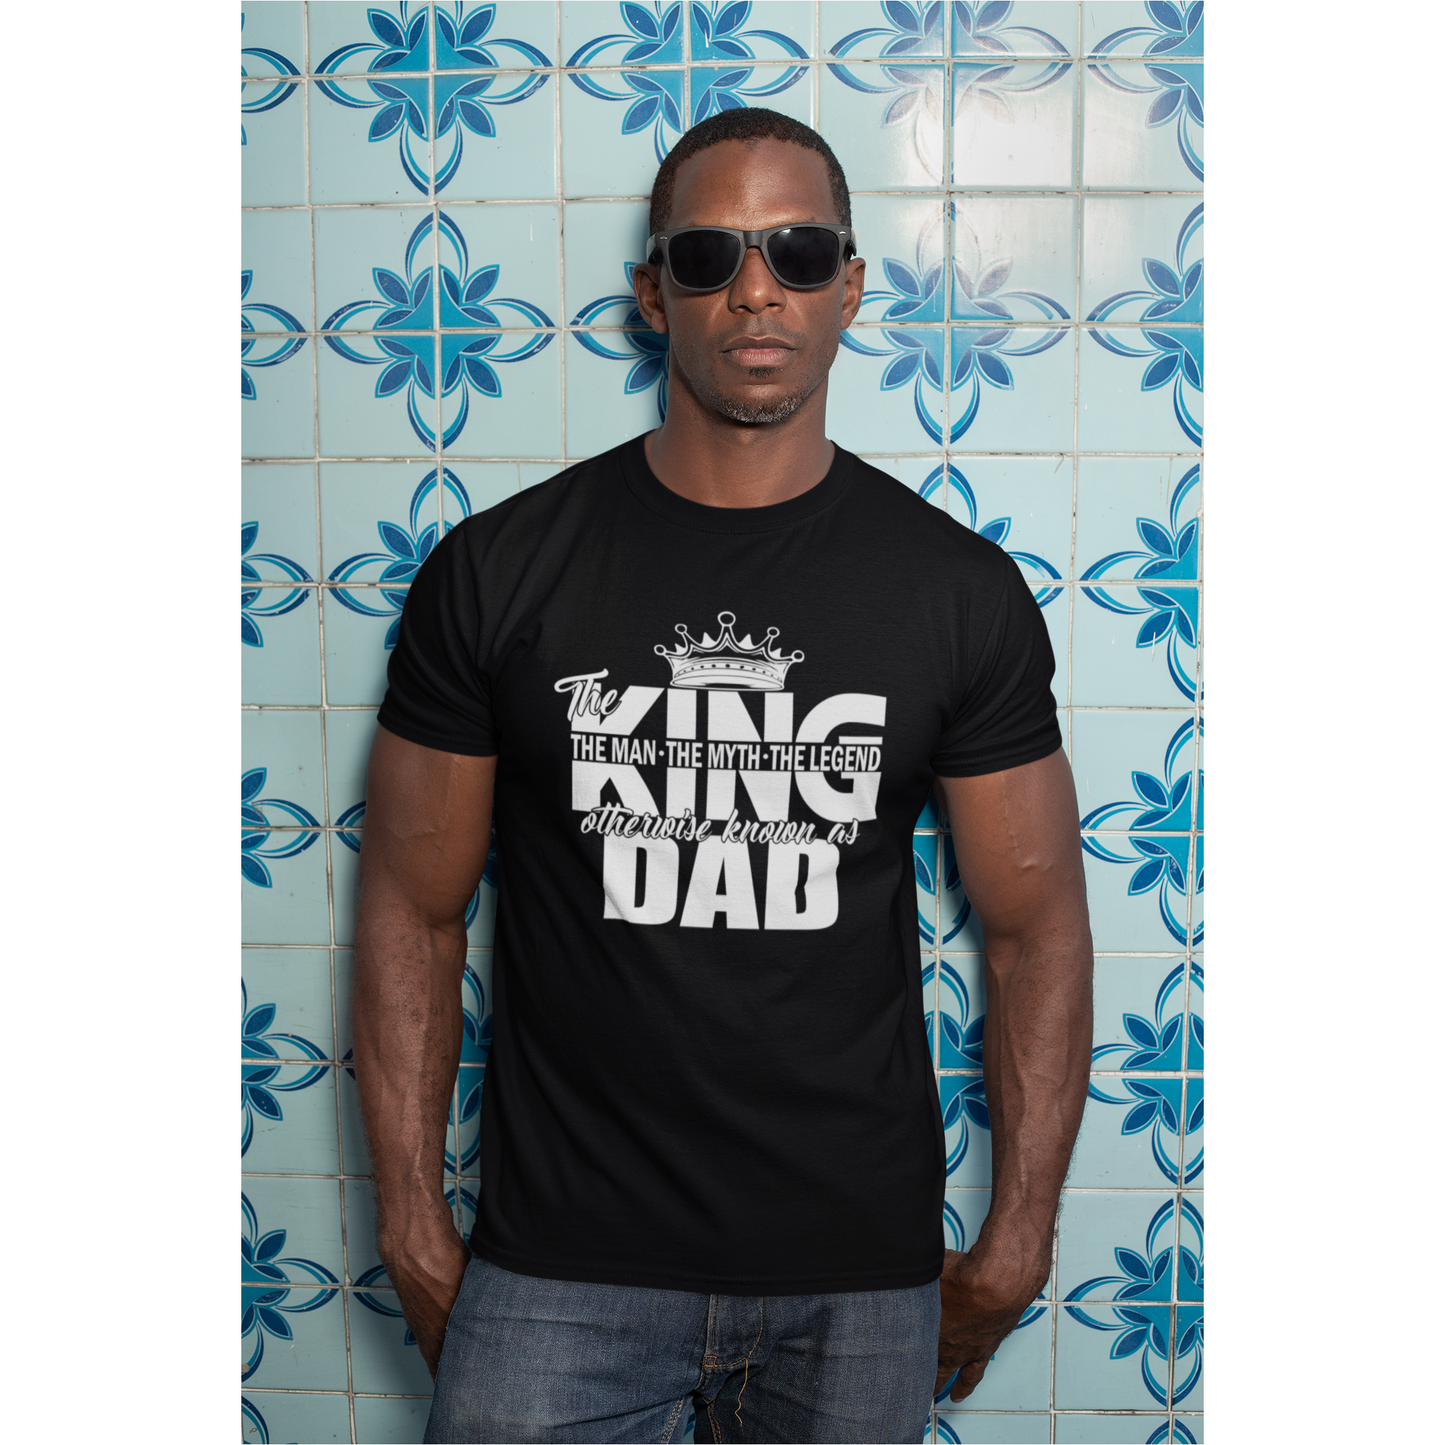 King otherwise known as Dad